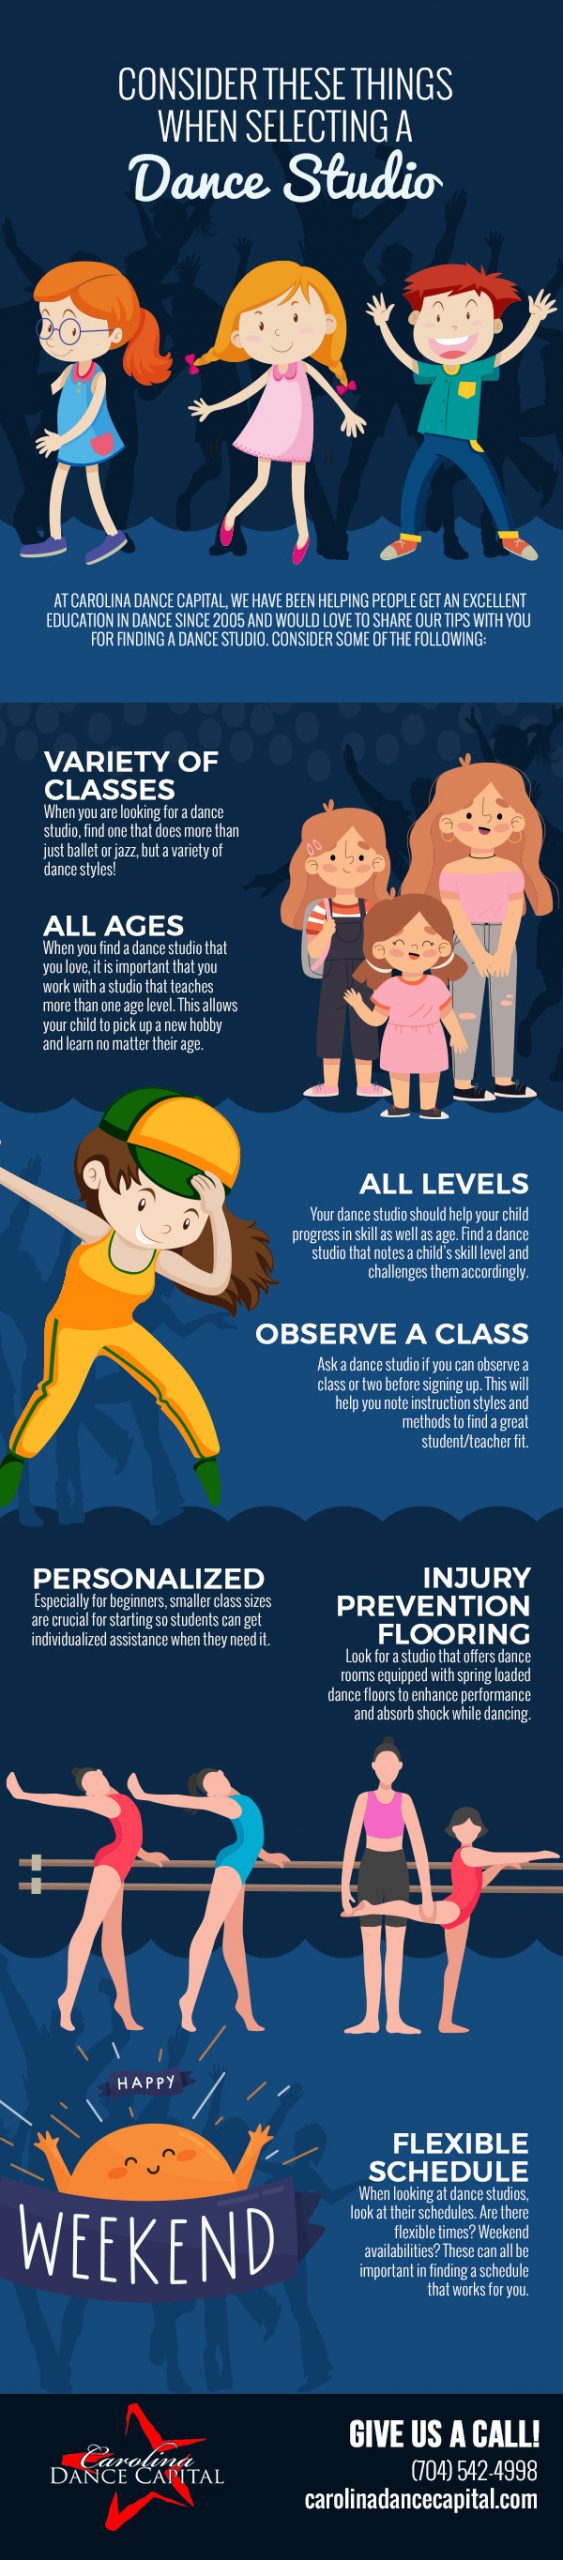 Consider These Things When Selecting a Dance Studio [infographic]